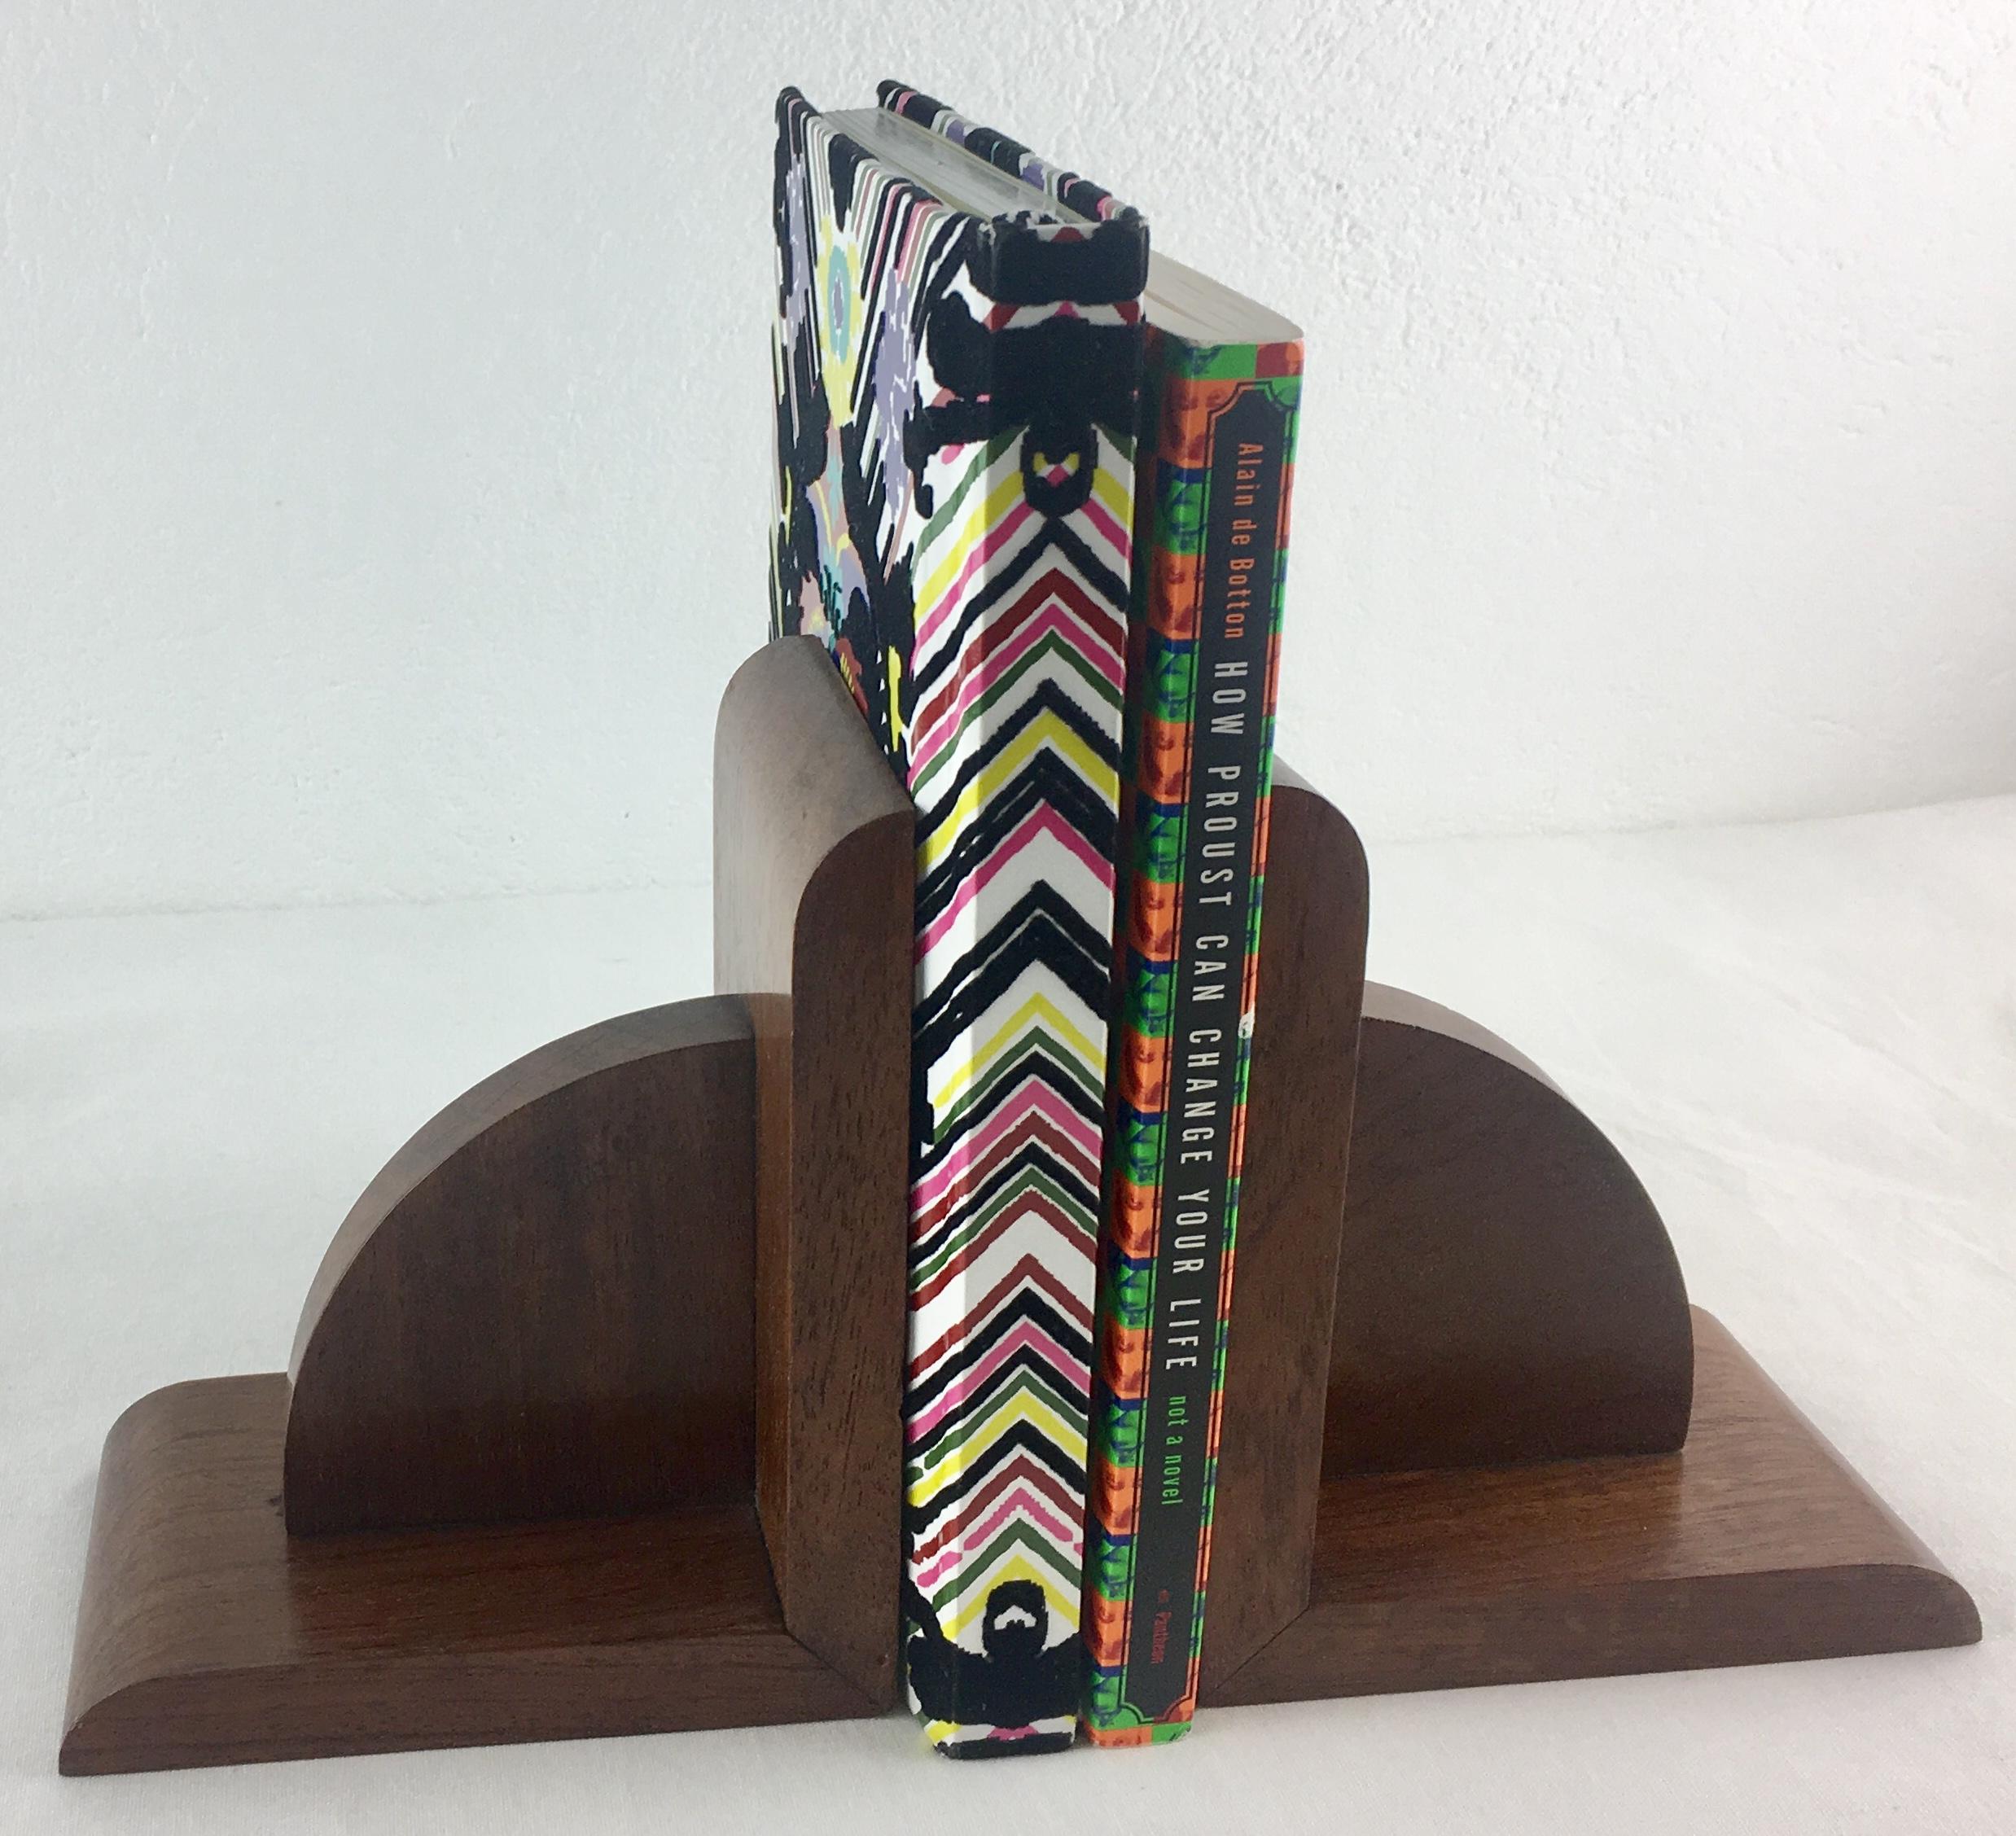 A nice quality pair of French Art Deco period bookends. 

These handcrafted bookends can be positioned either horizontally or vertically to displace your favorite books on a nightstand, mantel, dresser or shelf. Made with all natural walnut wood.